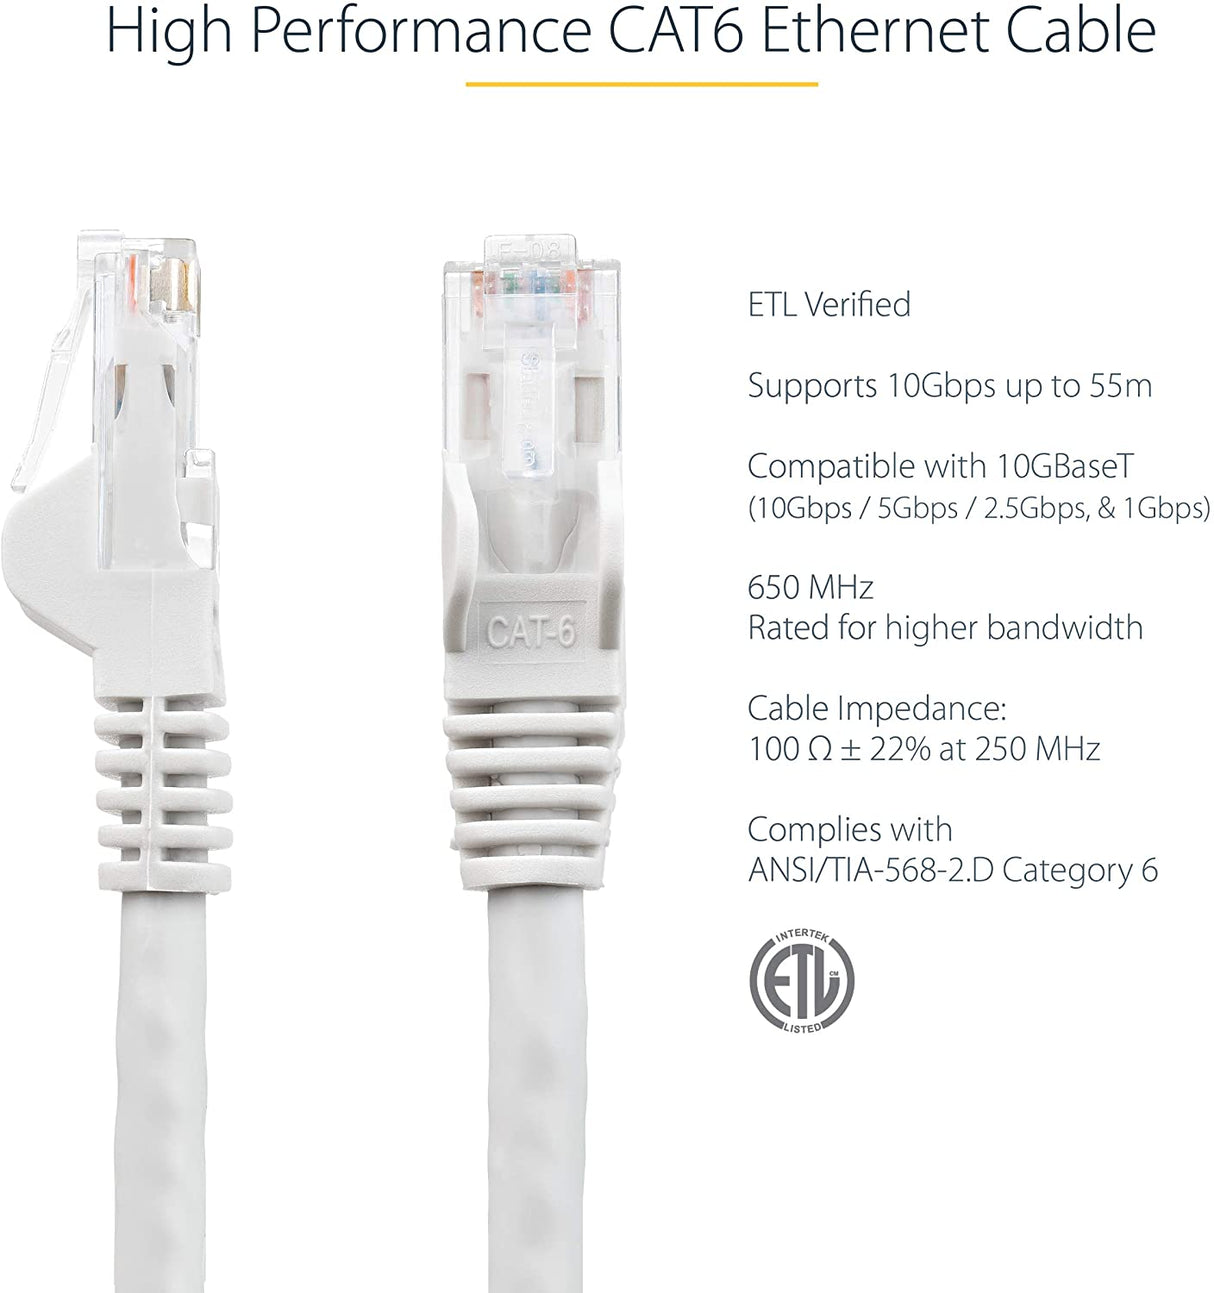 StarTech.com 10ft CAT6 Ethernet Cable - White CAT 6 Gigabit Ethernet Wire - 650MHz 100W PoE RJ45 UTP Network/Patch Cord Snagless w/Strain Relief Fluke Tested/Wiring is UL Certified/TIA (N6PATCH10WH) White 10 ft / 3m 1 Pack